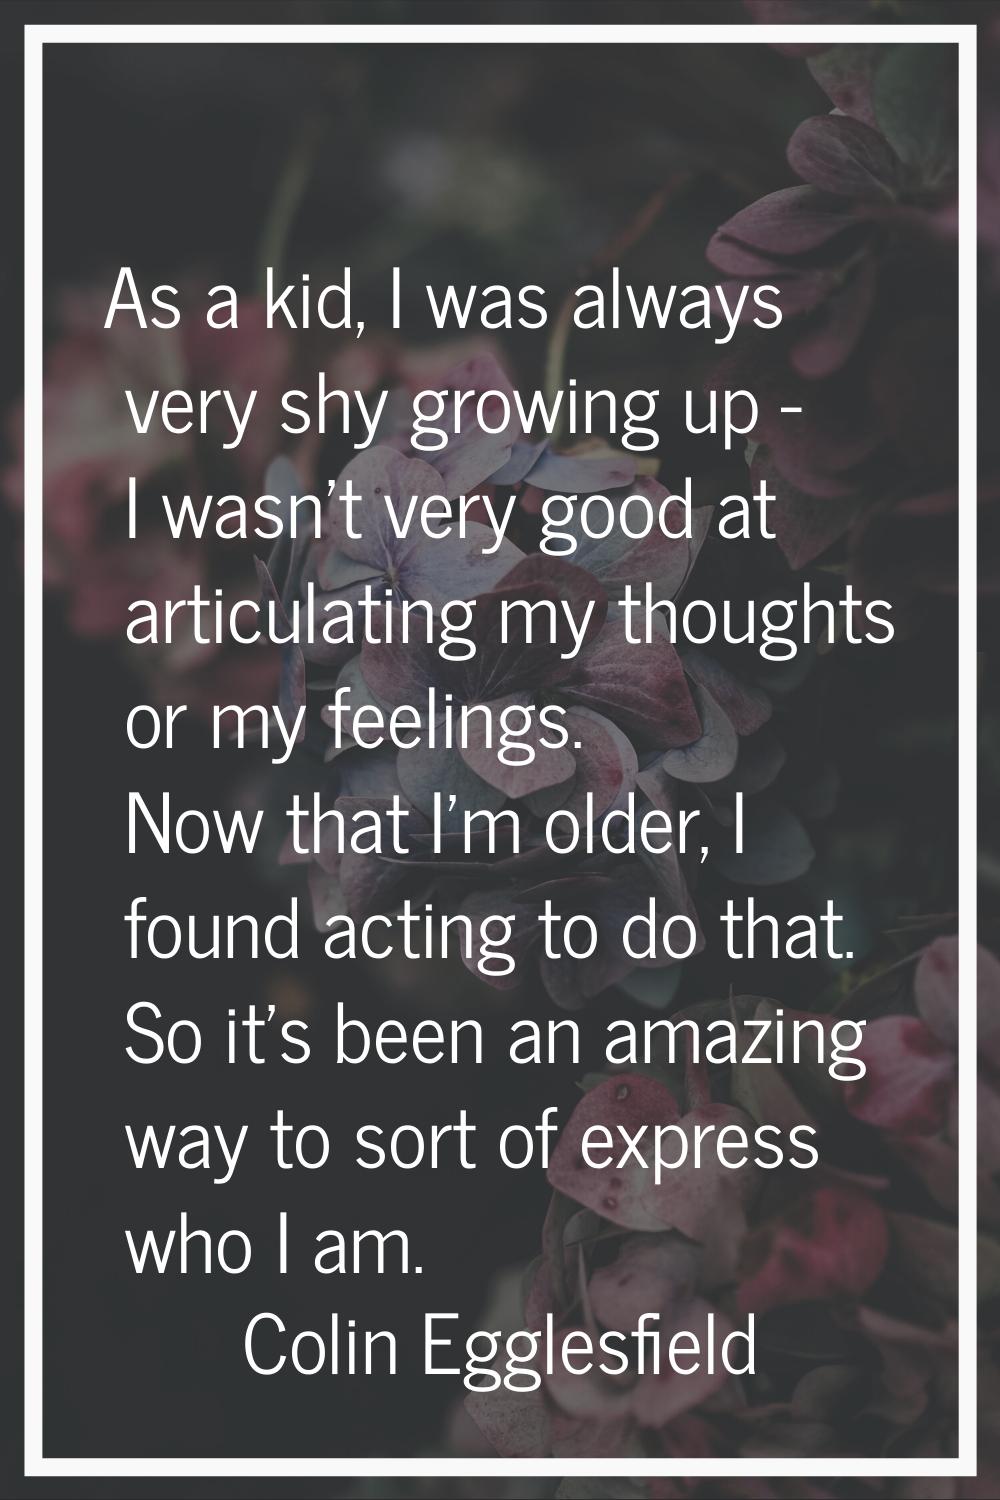 As a kid, I was always very shy growing up - I wasn't very good at articulating my thoughts or my f